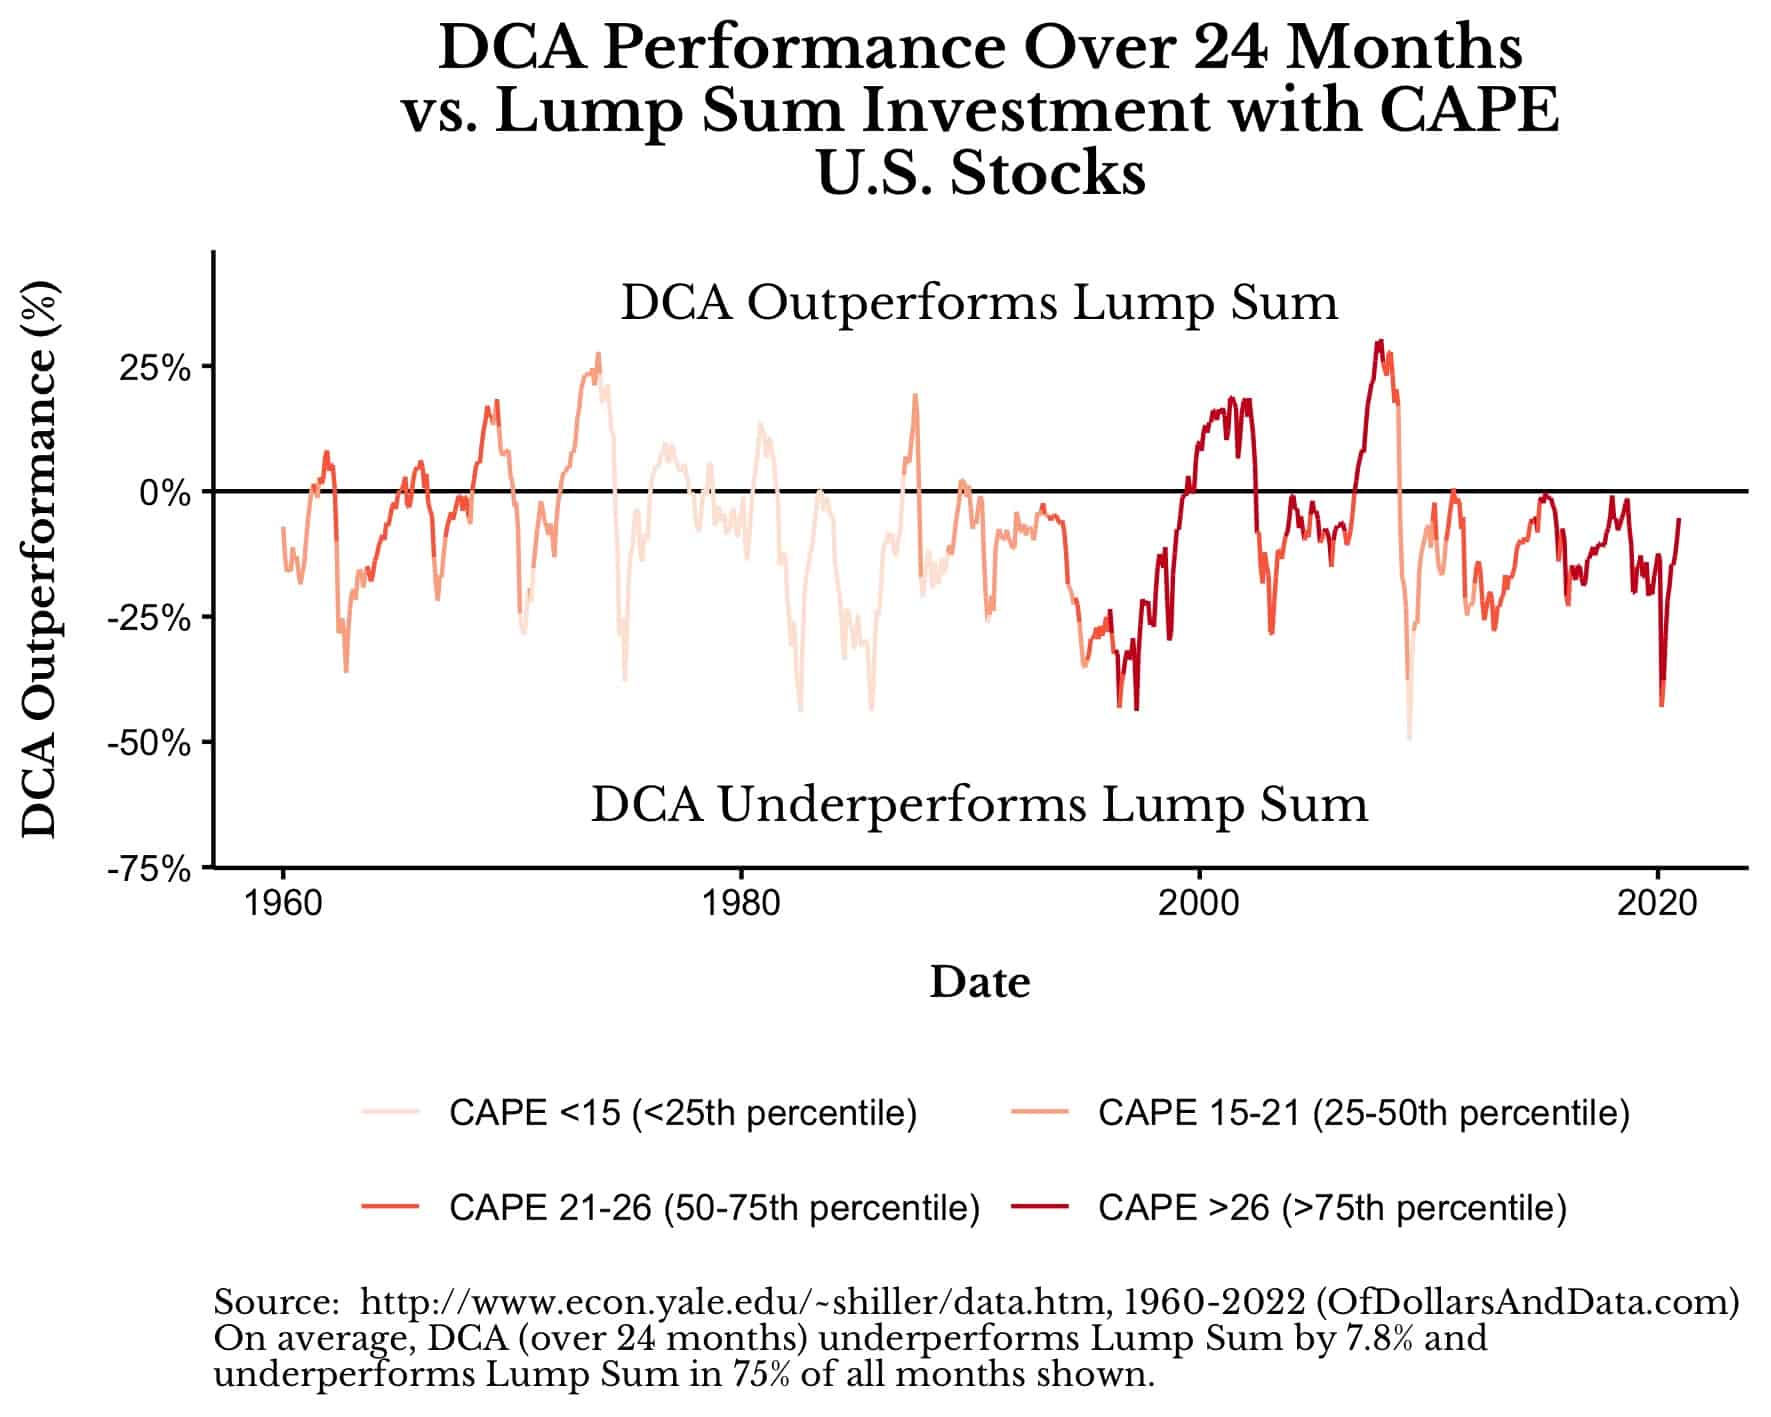 DCA vs. Lump Sum performance into U.S. stocks from 1960-2018 with CAPE valuations are highlighted.